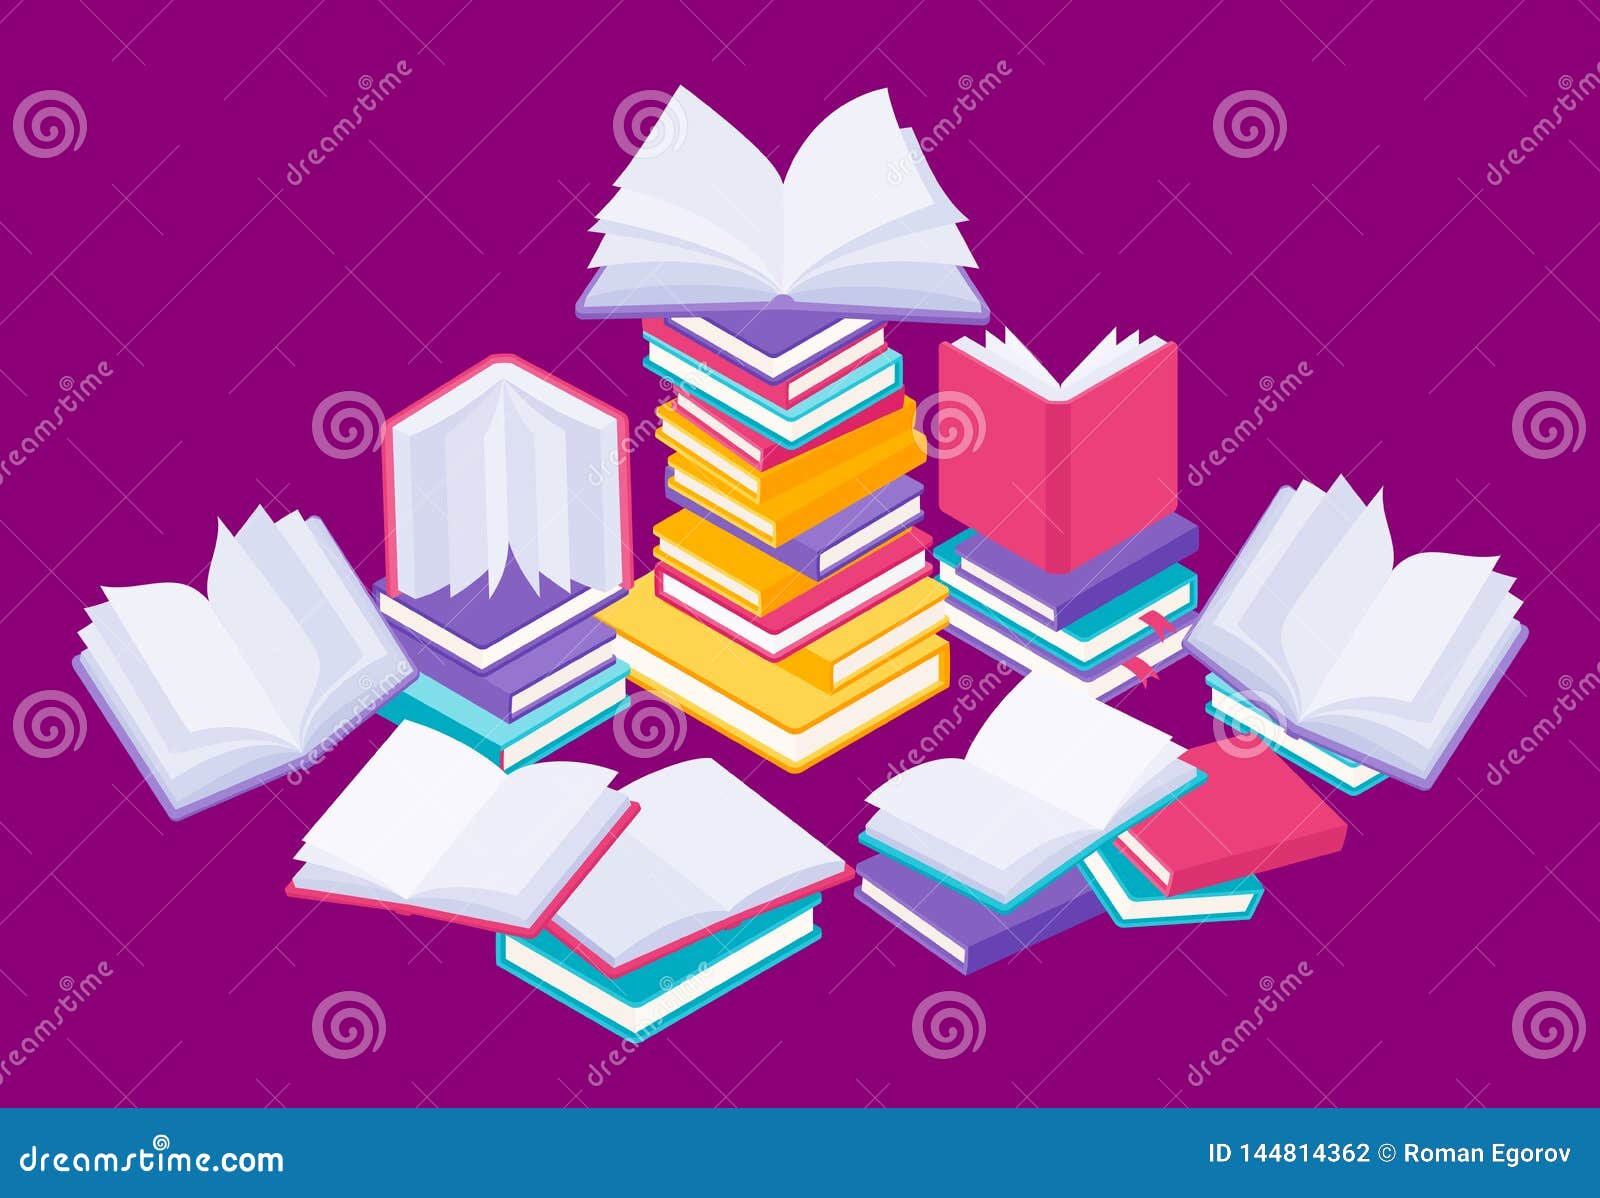 flat books concept. study reading and education  with stack of open close and flying books.  knowledge